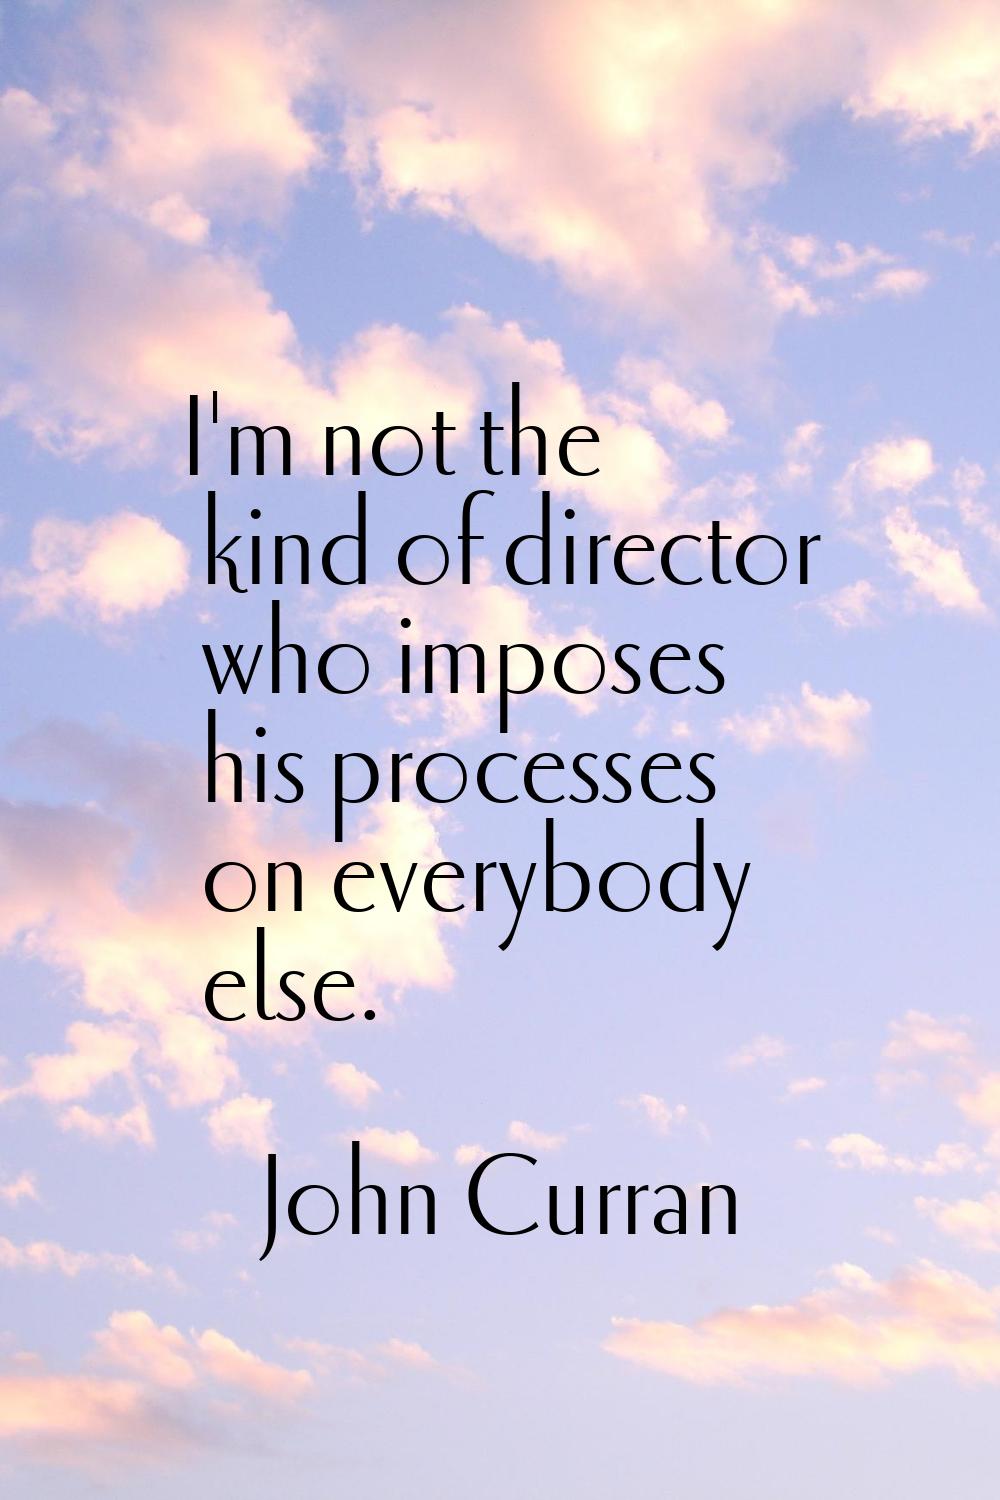 I'm not the kind of director who imposes his processes on everybody else.